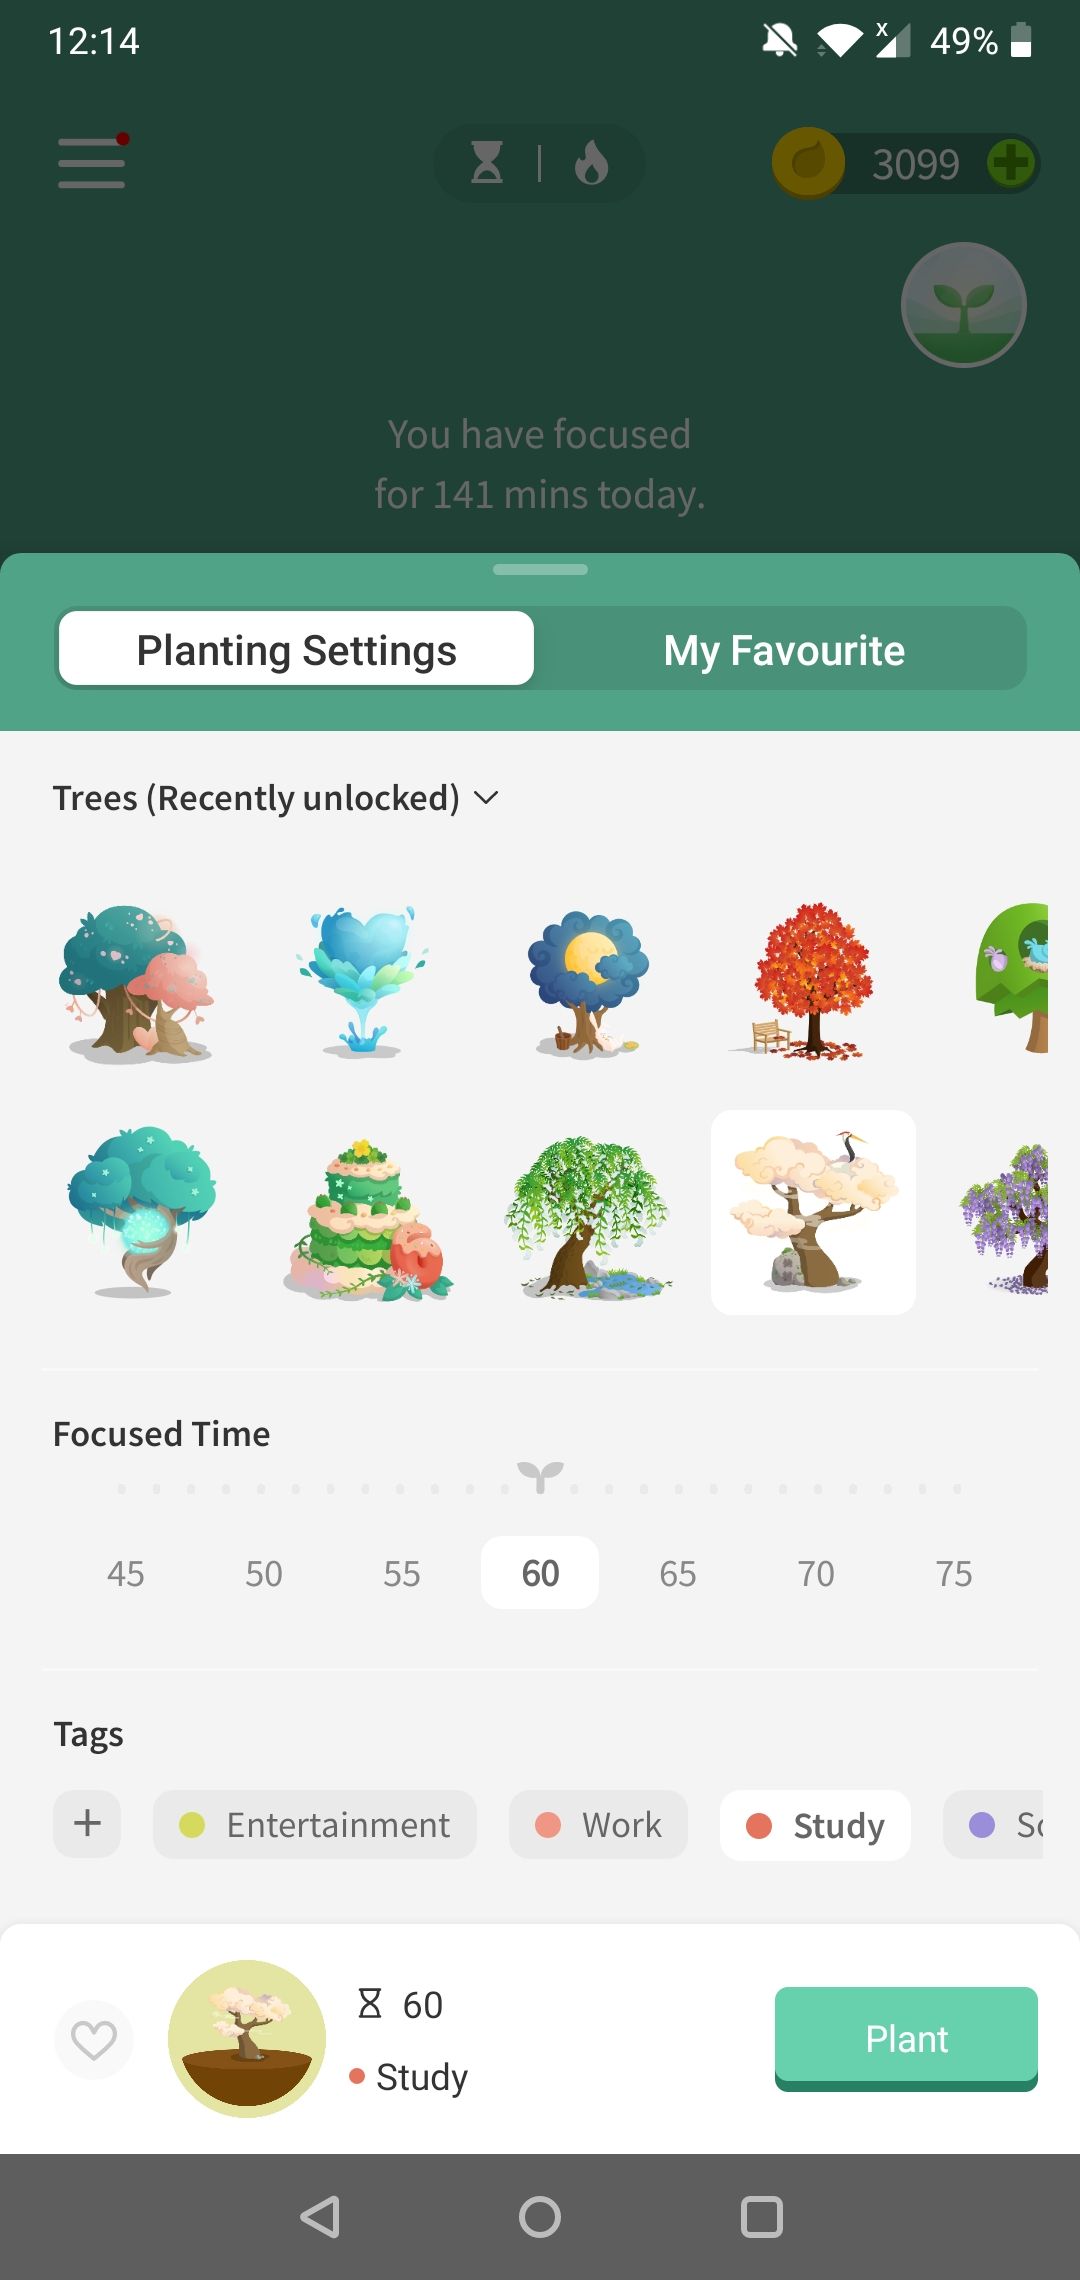 The "Planting Settings" section on the Forest Android app.